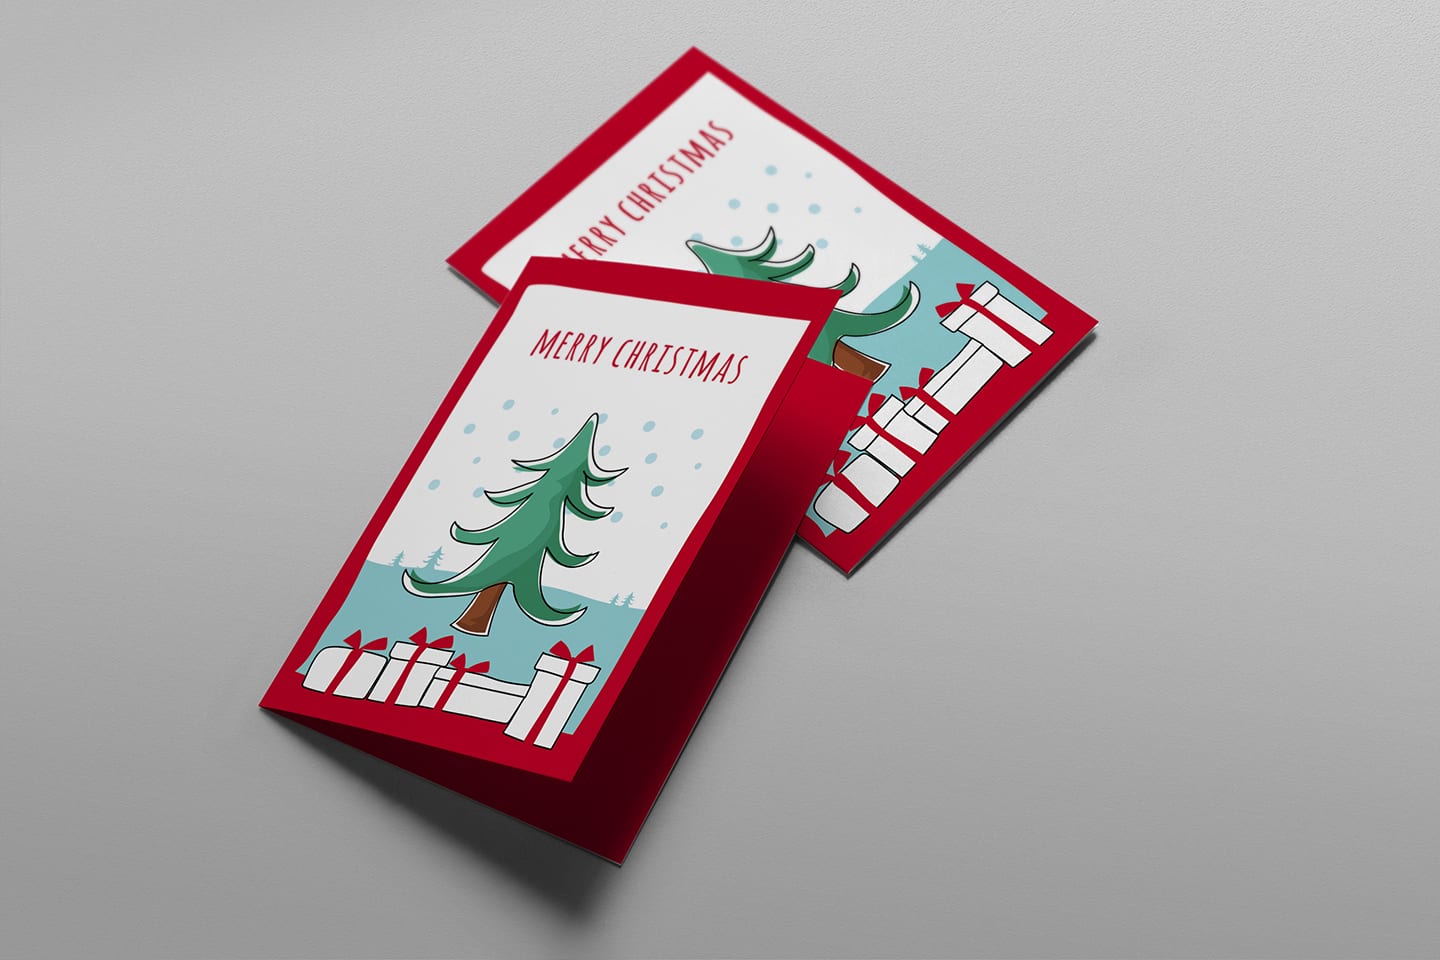 Free Christmas Card Templates for Photoshop & Illustrator Intended For Free Christmas Card Templates For Photoshop